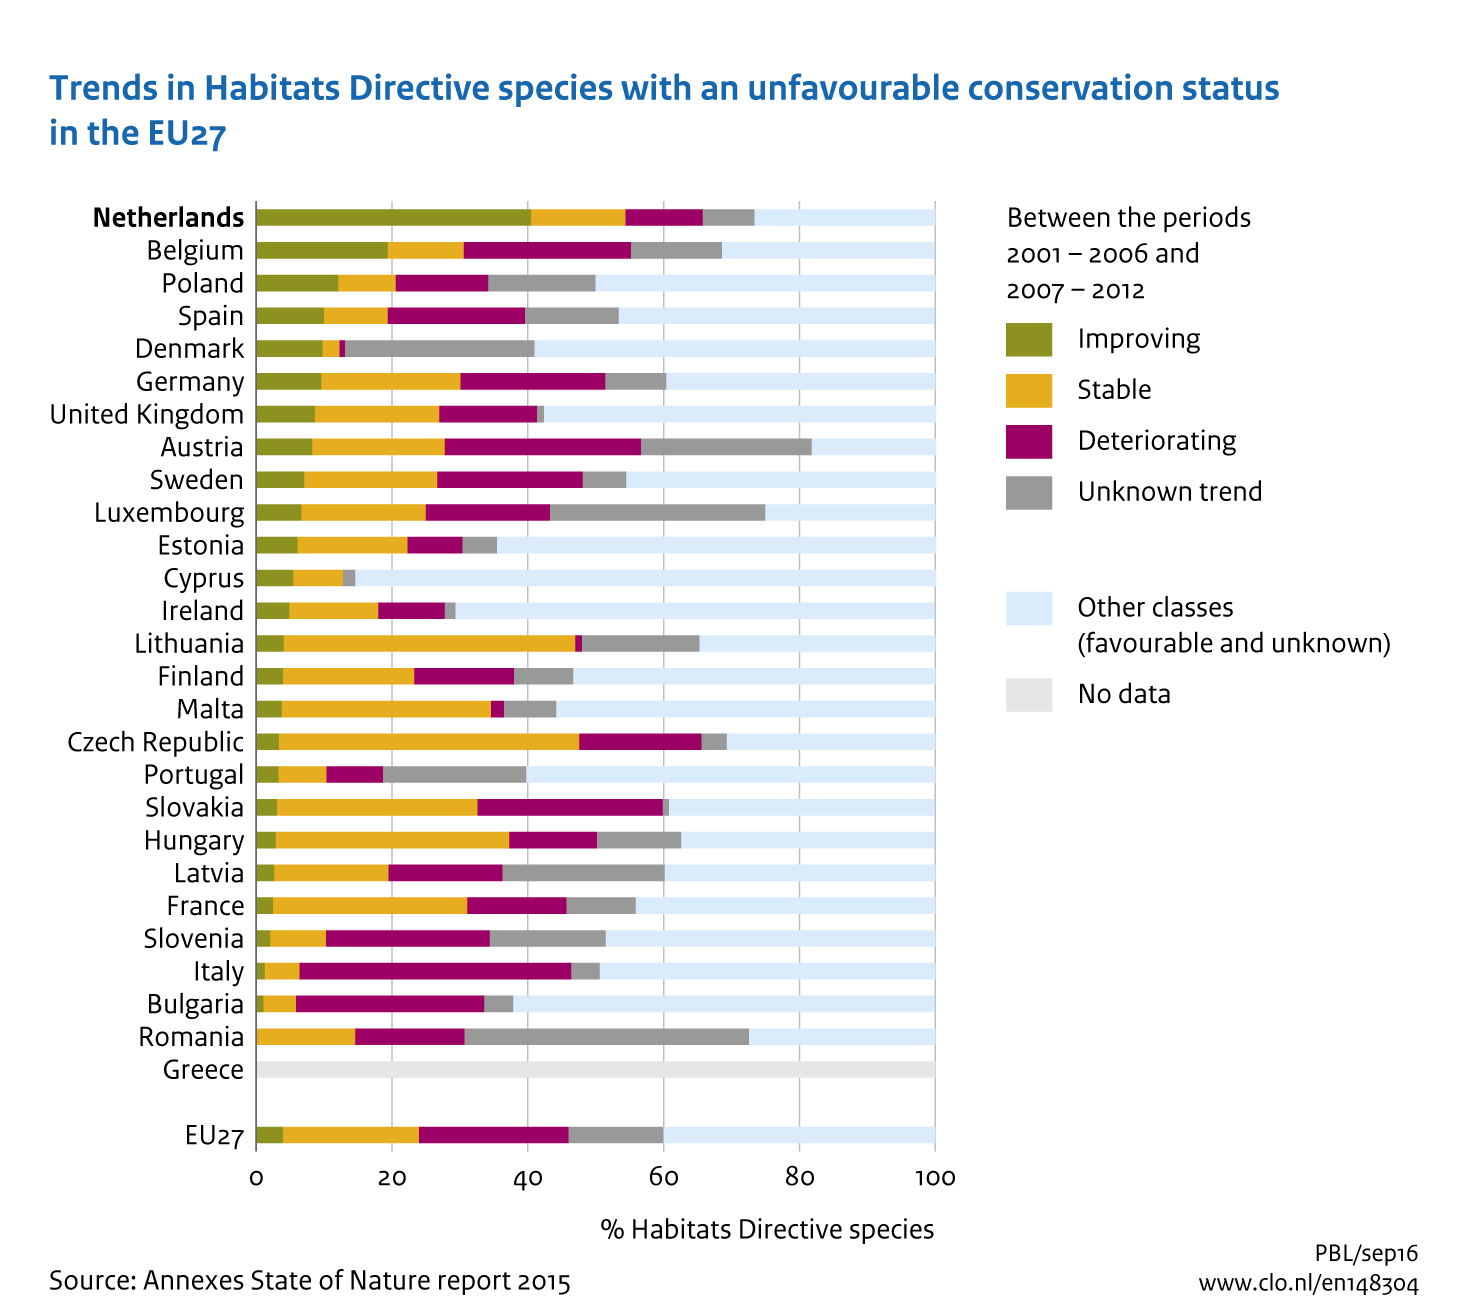 Image Trend in Habitat Directive species in EU27. The image is further explained in the text.